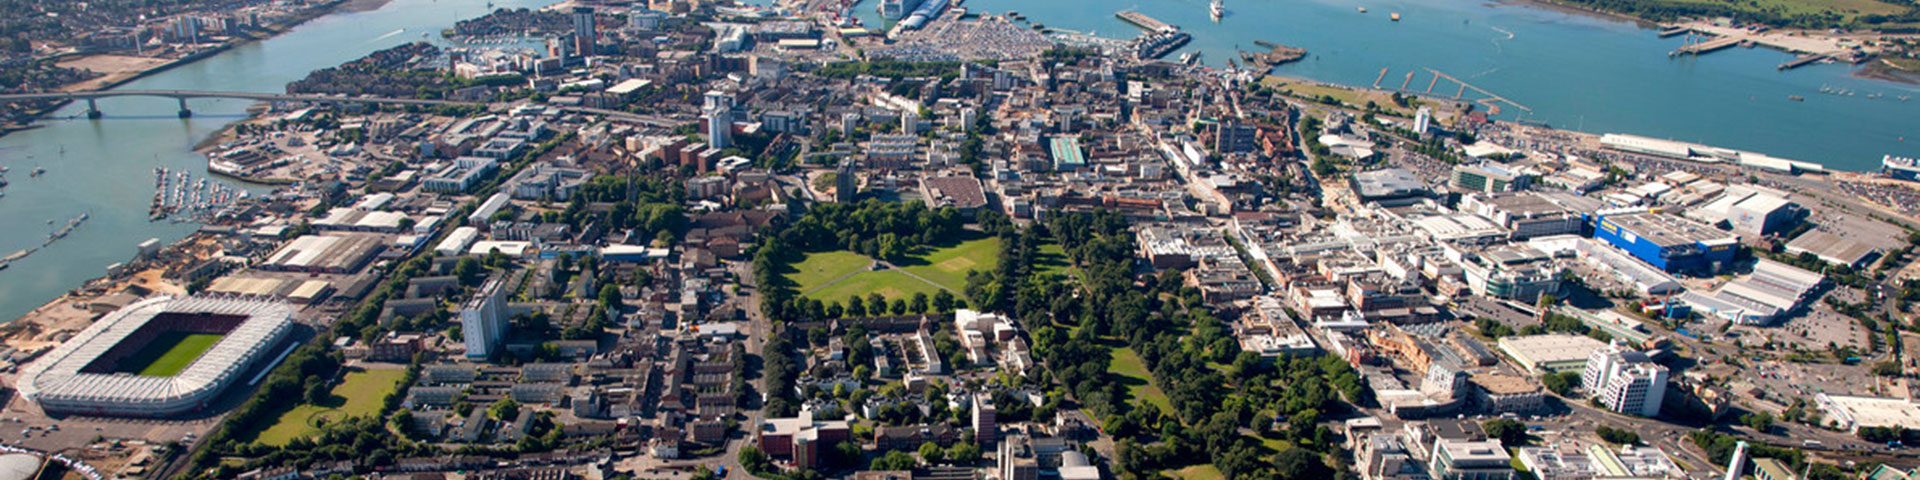 A picture of Southampton from up above showing the blue water at the top, countryside to the right, football stadium to the left and the city and its parks in the middle.